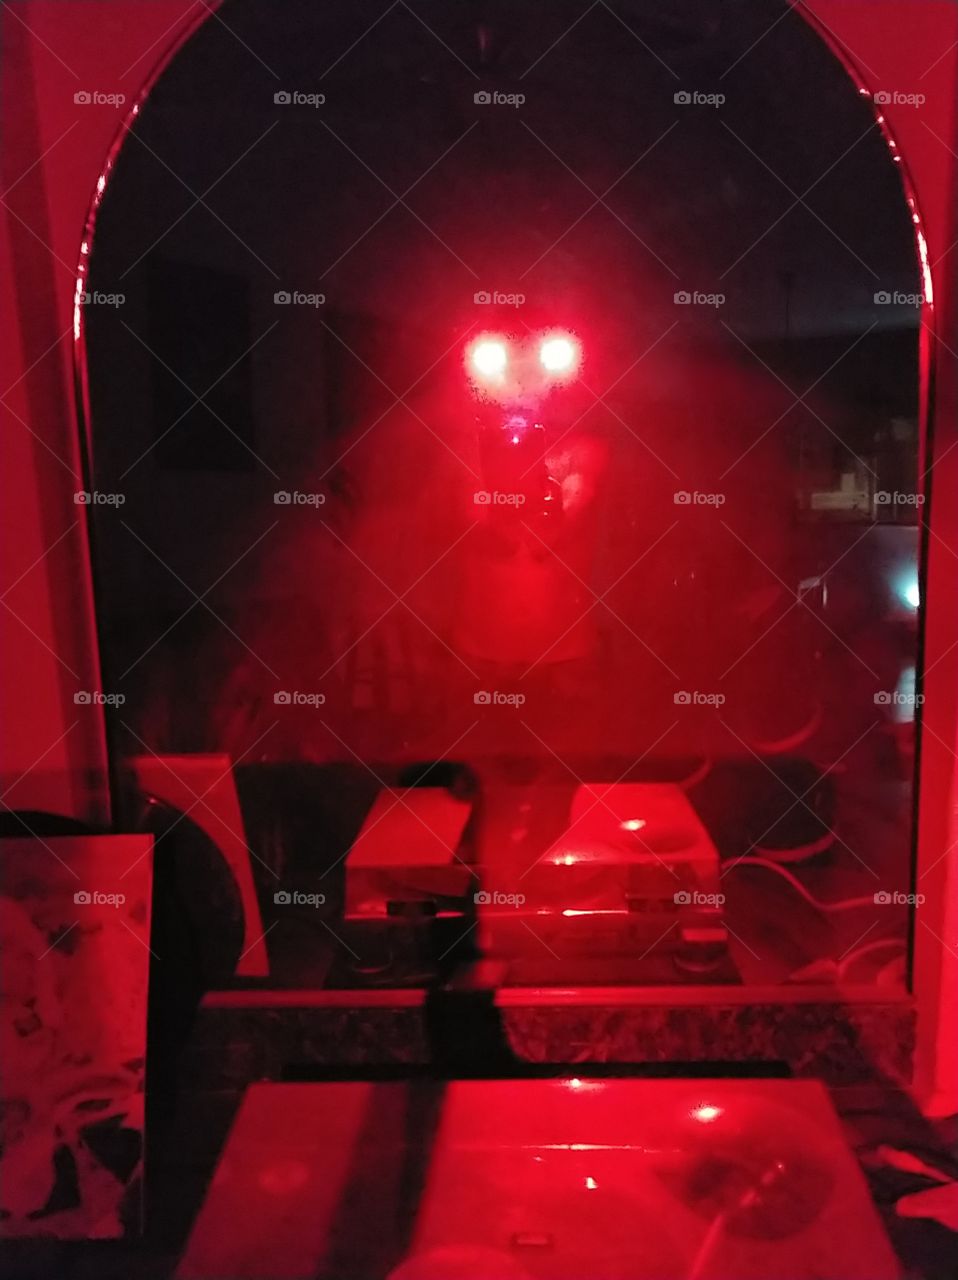 =There's a creepy creepy outside your mirror.=